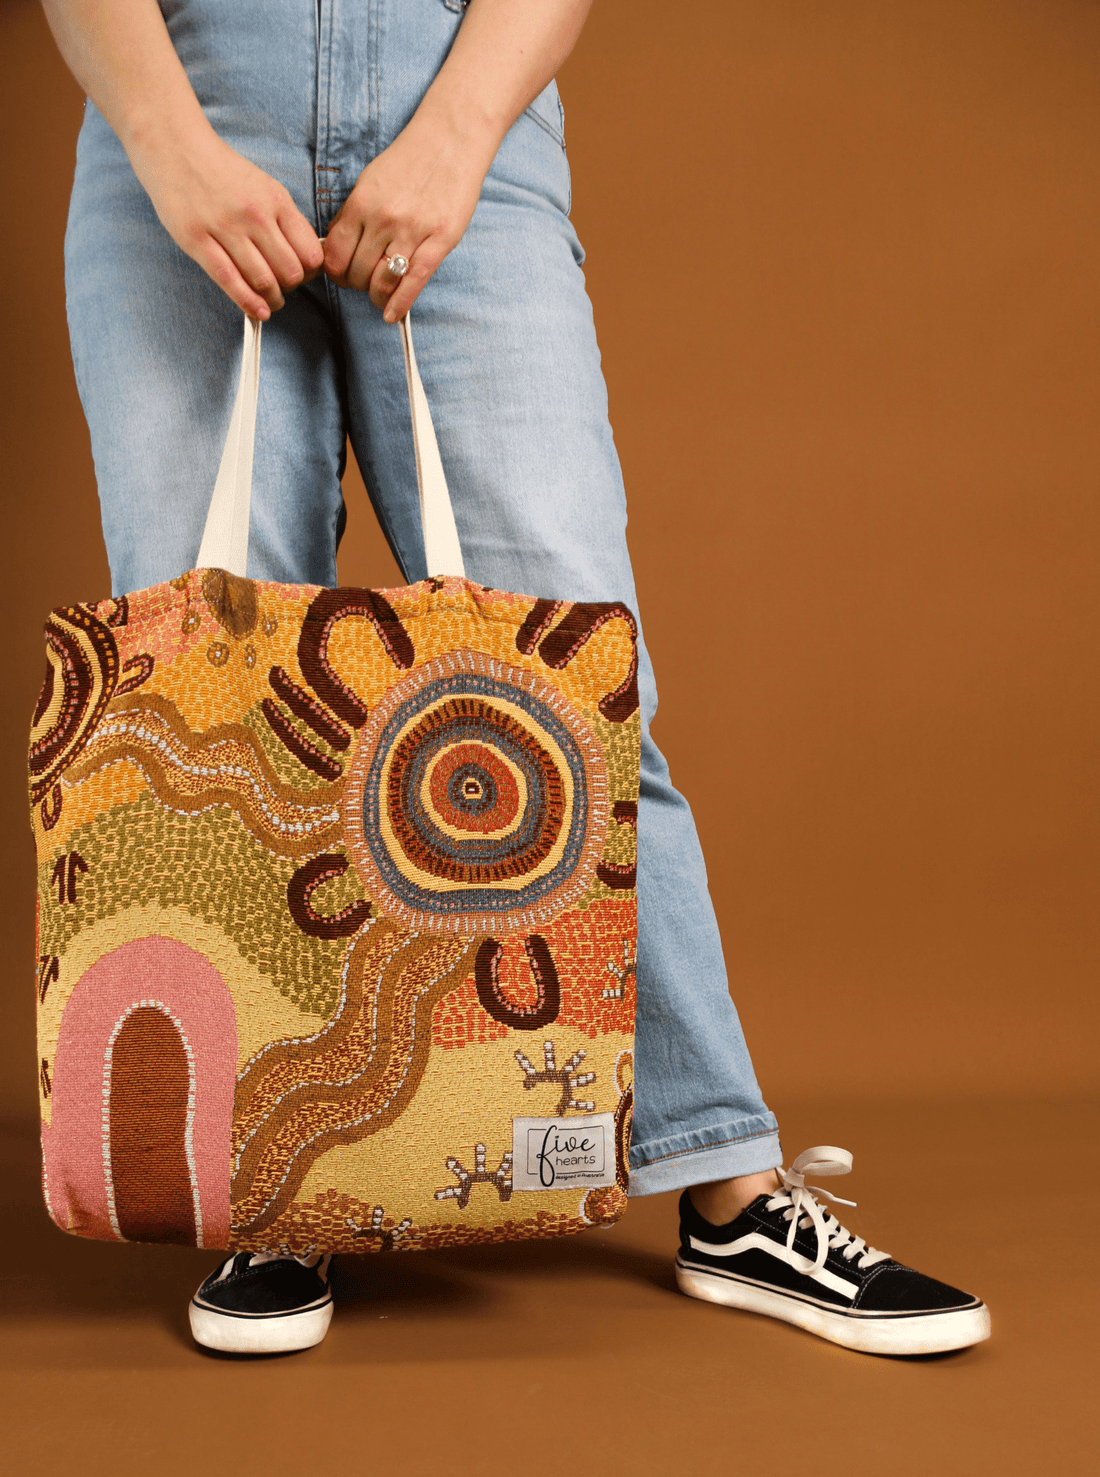 Coming Home Indigenous art tote bag. Woven from recycled fabrics. First Nations art, designed in Aus.